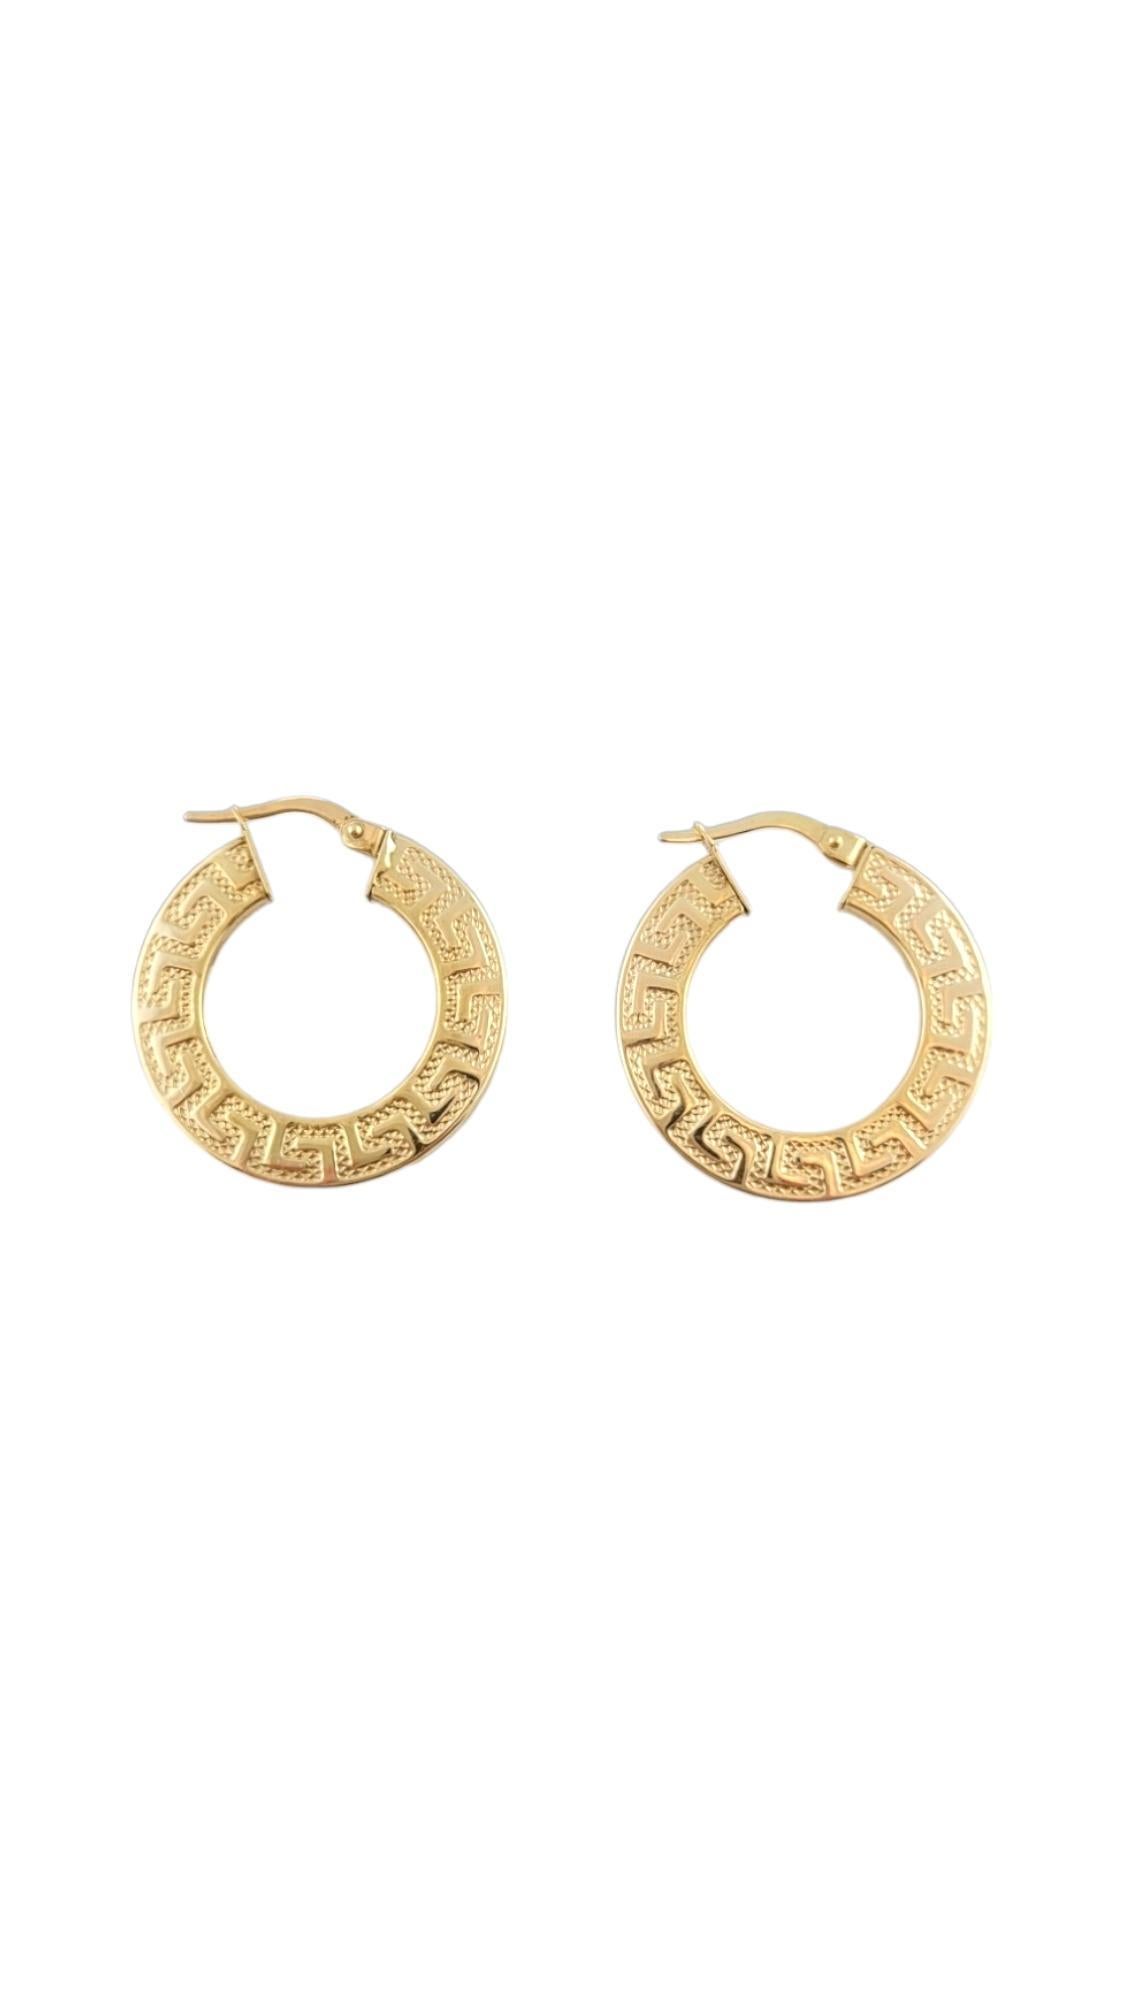 Vintage 10K Yellow Gold Hoop Earrings

10 karat yellow gold hoop earrings with Aztec key design.

Hallmark: 2RY 10KT Italy

Weight: 2.06 g/ 1.3 dwt.

Size: 26.17 mm X 24.71 mm X 1.93 mm/ 1.03 in. X 0.97 in. X 0.075 in.

4.7 mm thick.

Very good